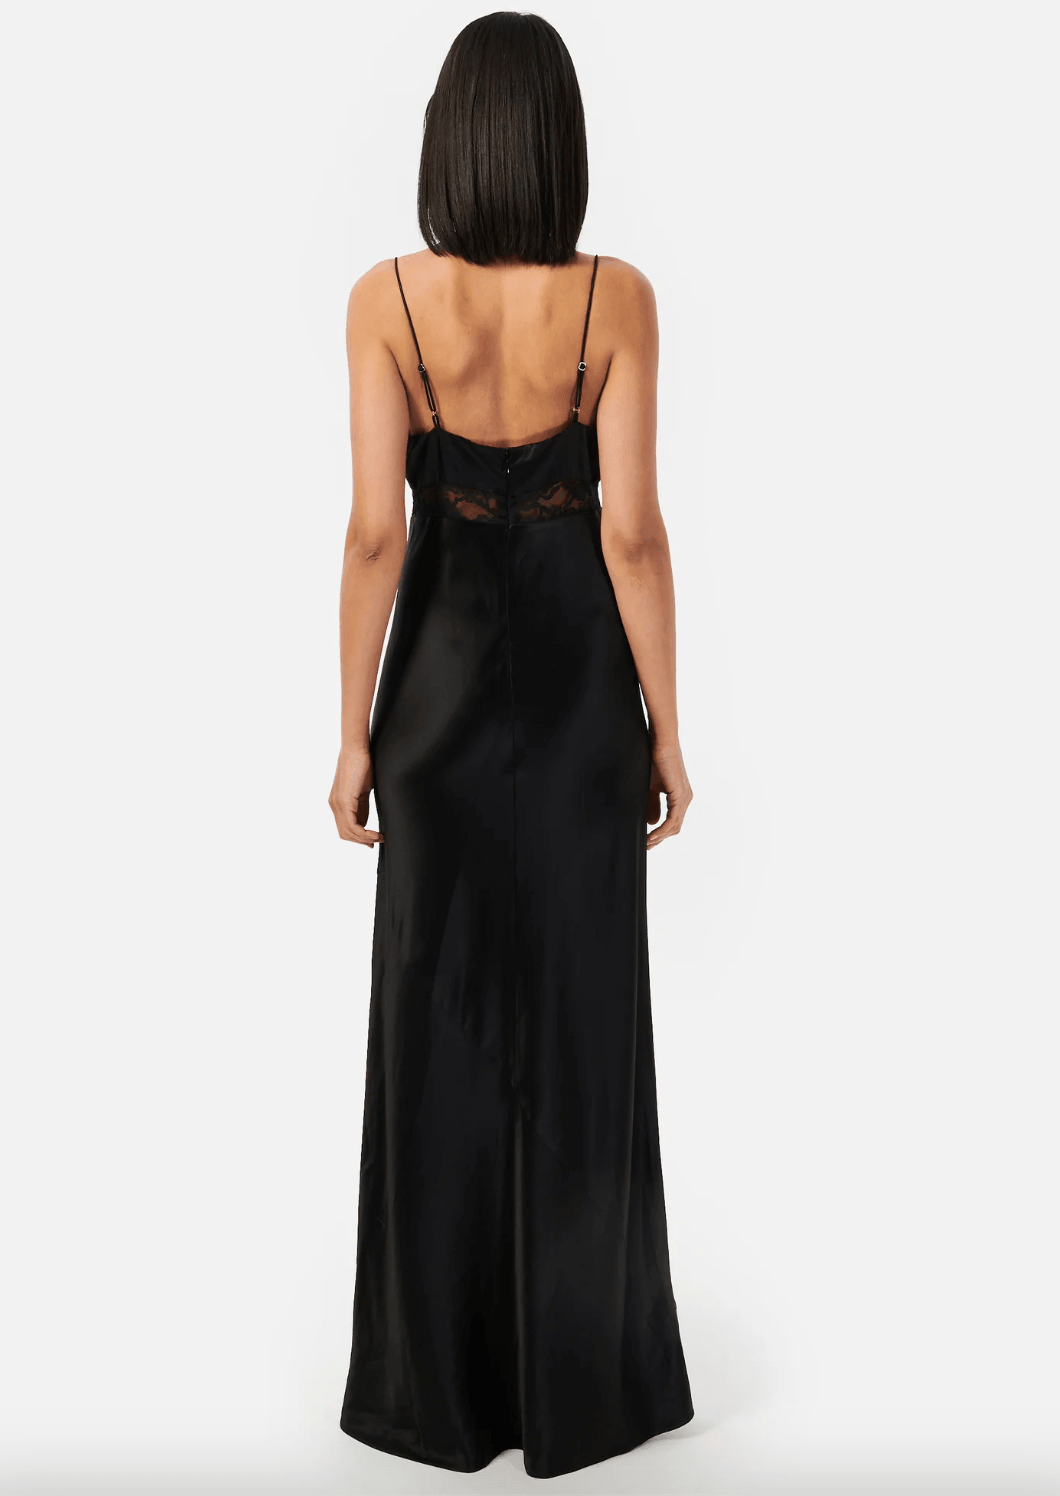 Zelda Gown by Cami NYC - Haven